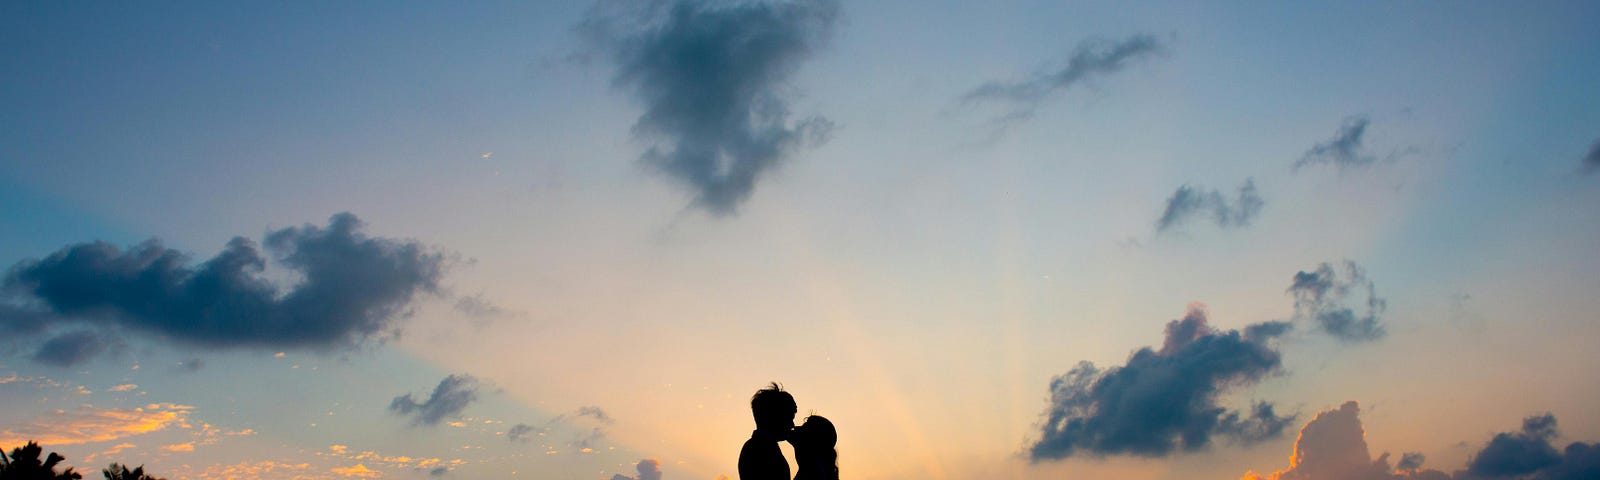 Silhouette of a couple embracing